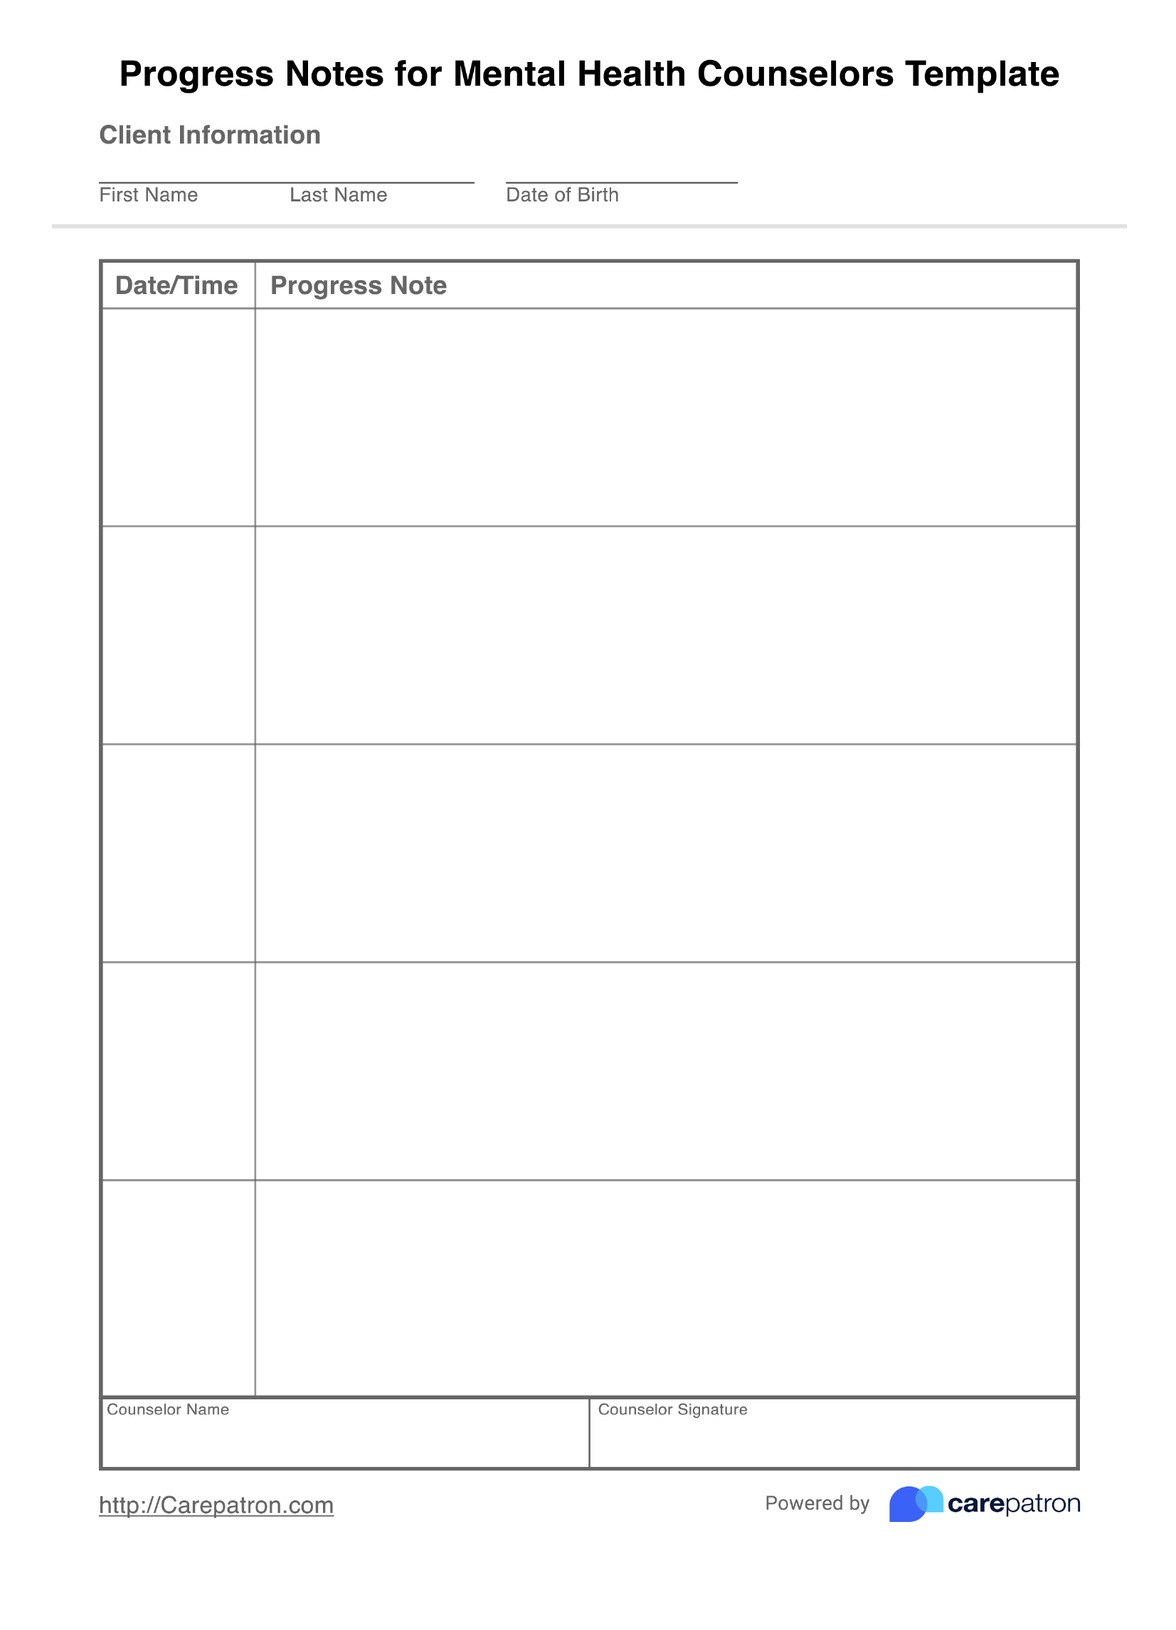 Progress Notes For Mental Health Counselors Template PDF Example